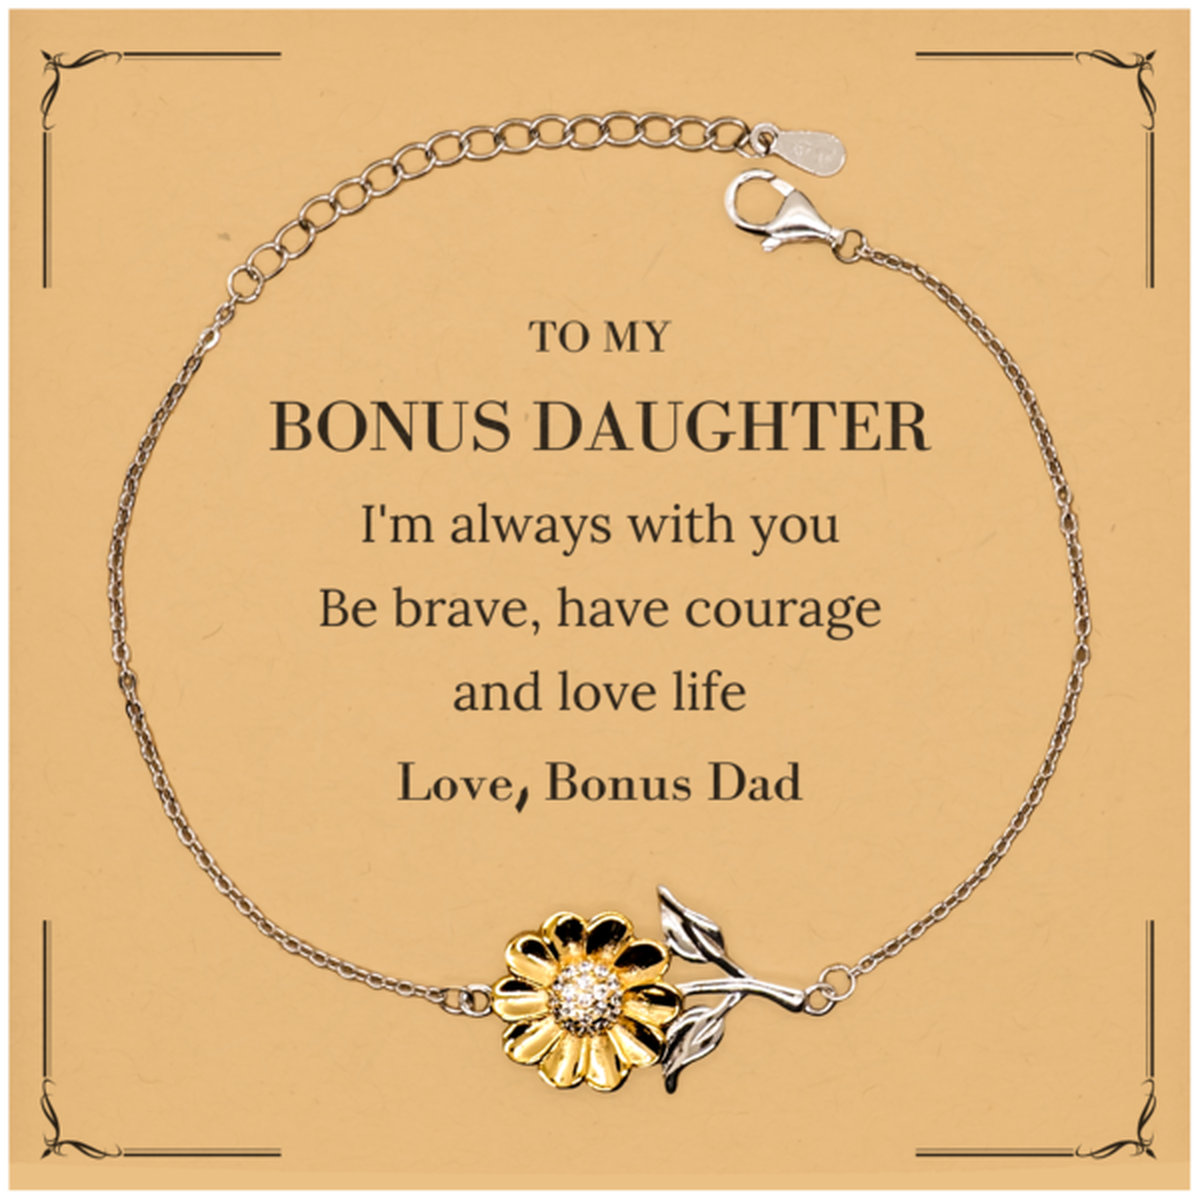 To My Bonus Daughter Gifts from Bonus Dad, Unique Sunflower Bracelet Inspirational Christmas Birthday Graduation Gifts for Bonus Daughter I'm always with you. Be brave, have courage and love life. Love, Bonus Dad